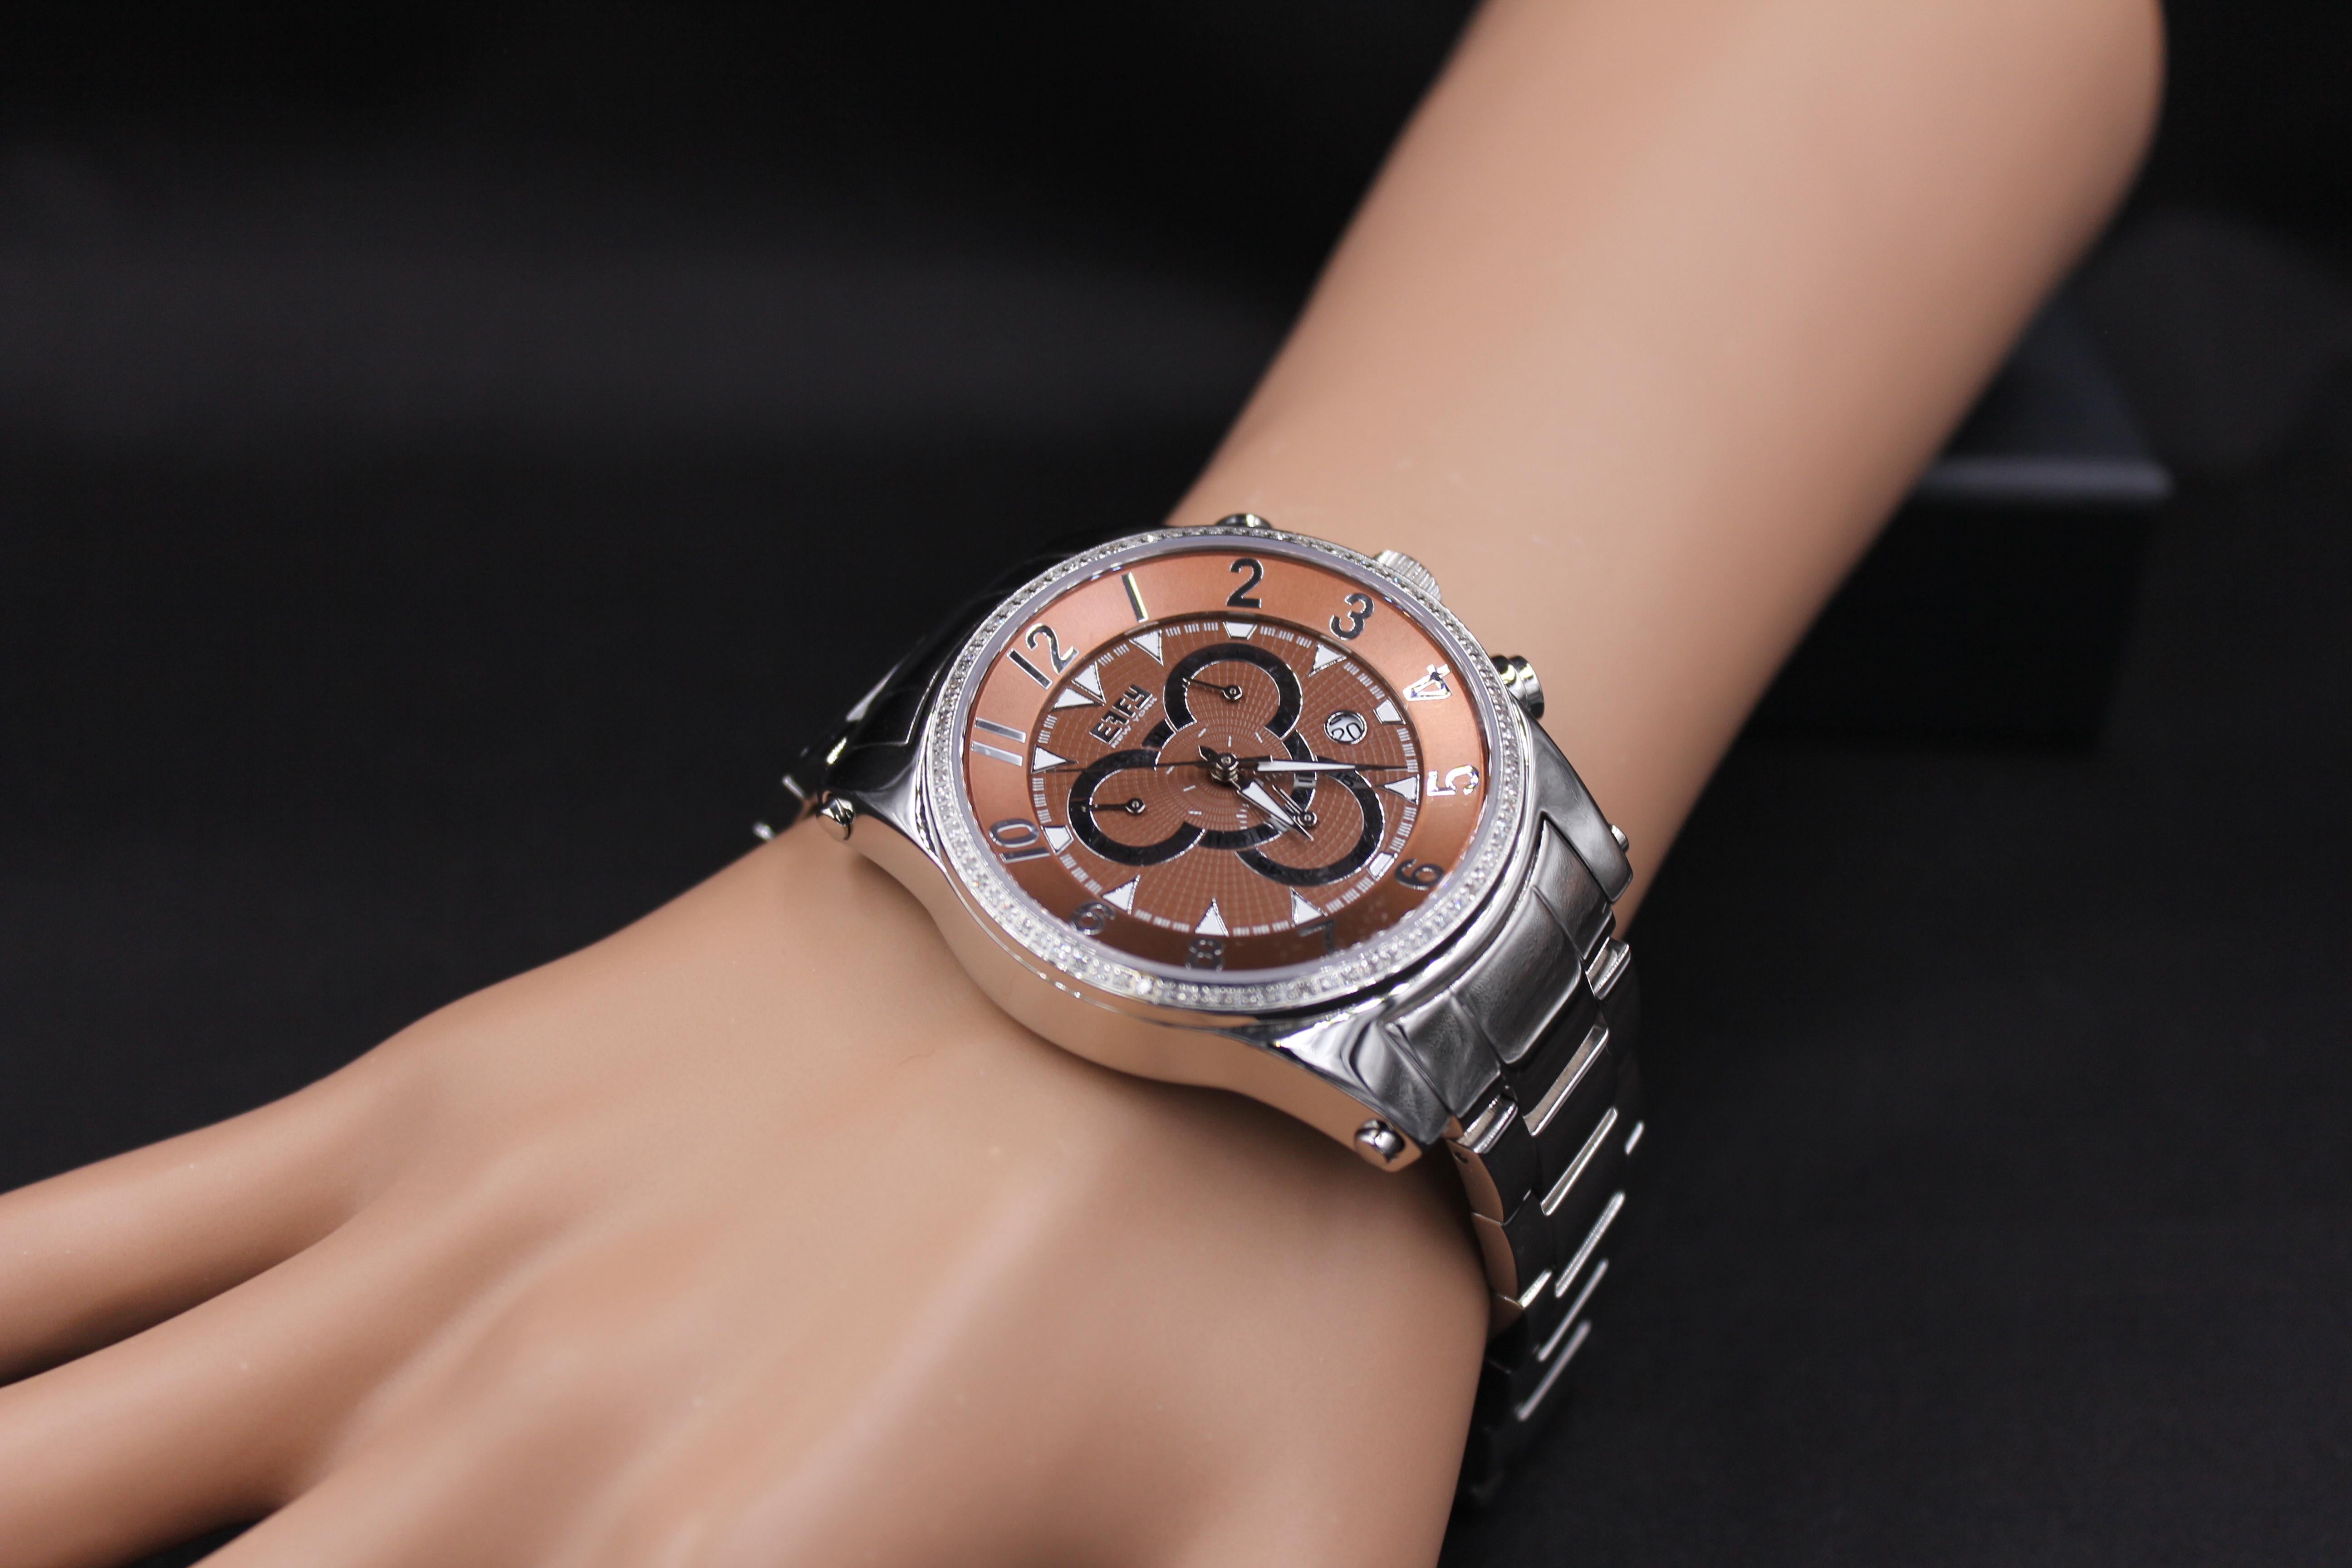 ·  Quality Swiss-Quartz movement guarantees precision timing
·         Mother-of-Pearl dial micro-paved with diamonds and gemstones enhances any dress style
·         Scratch-resistant sapphire glass lens
·         Genuine exotic leather strap or